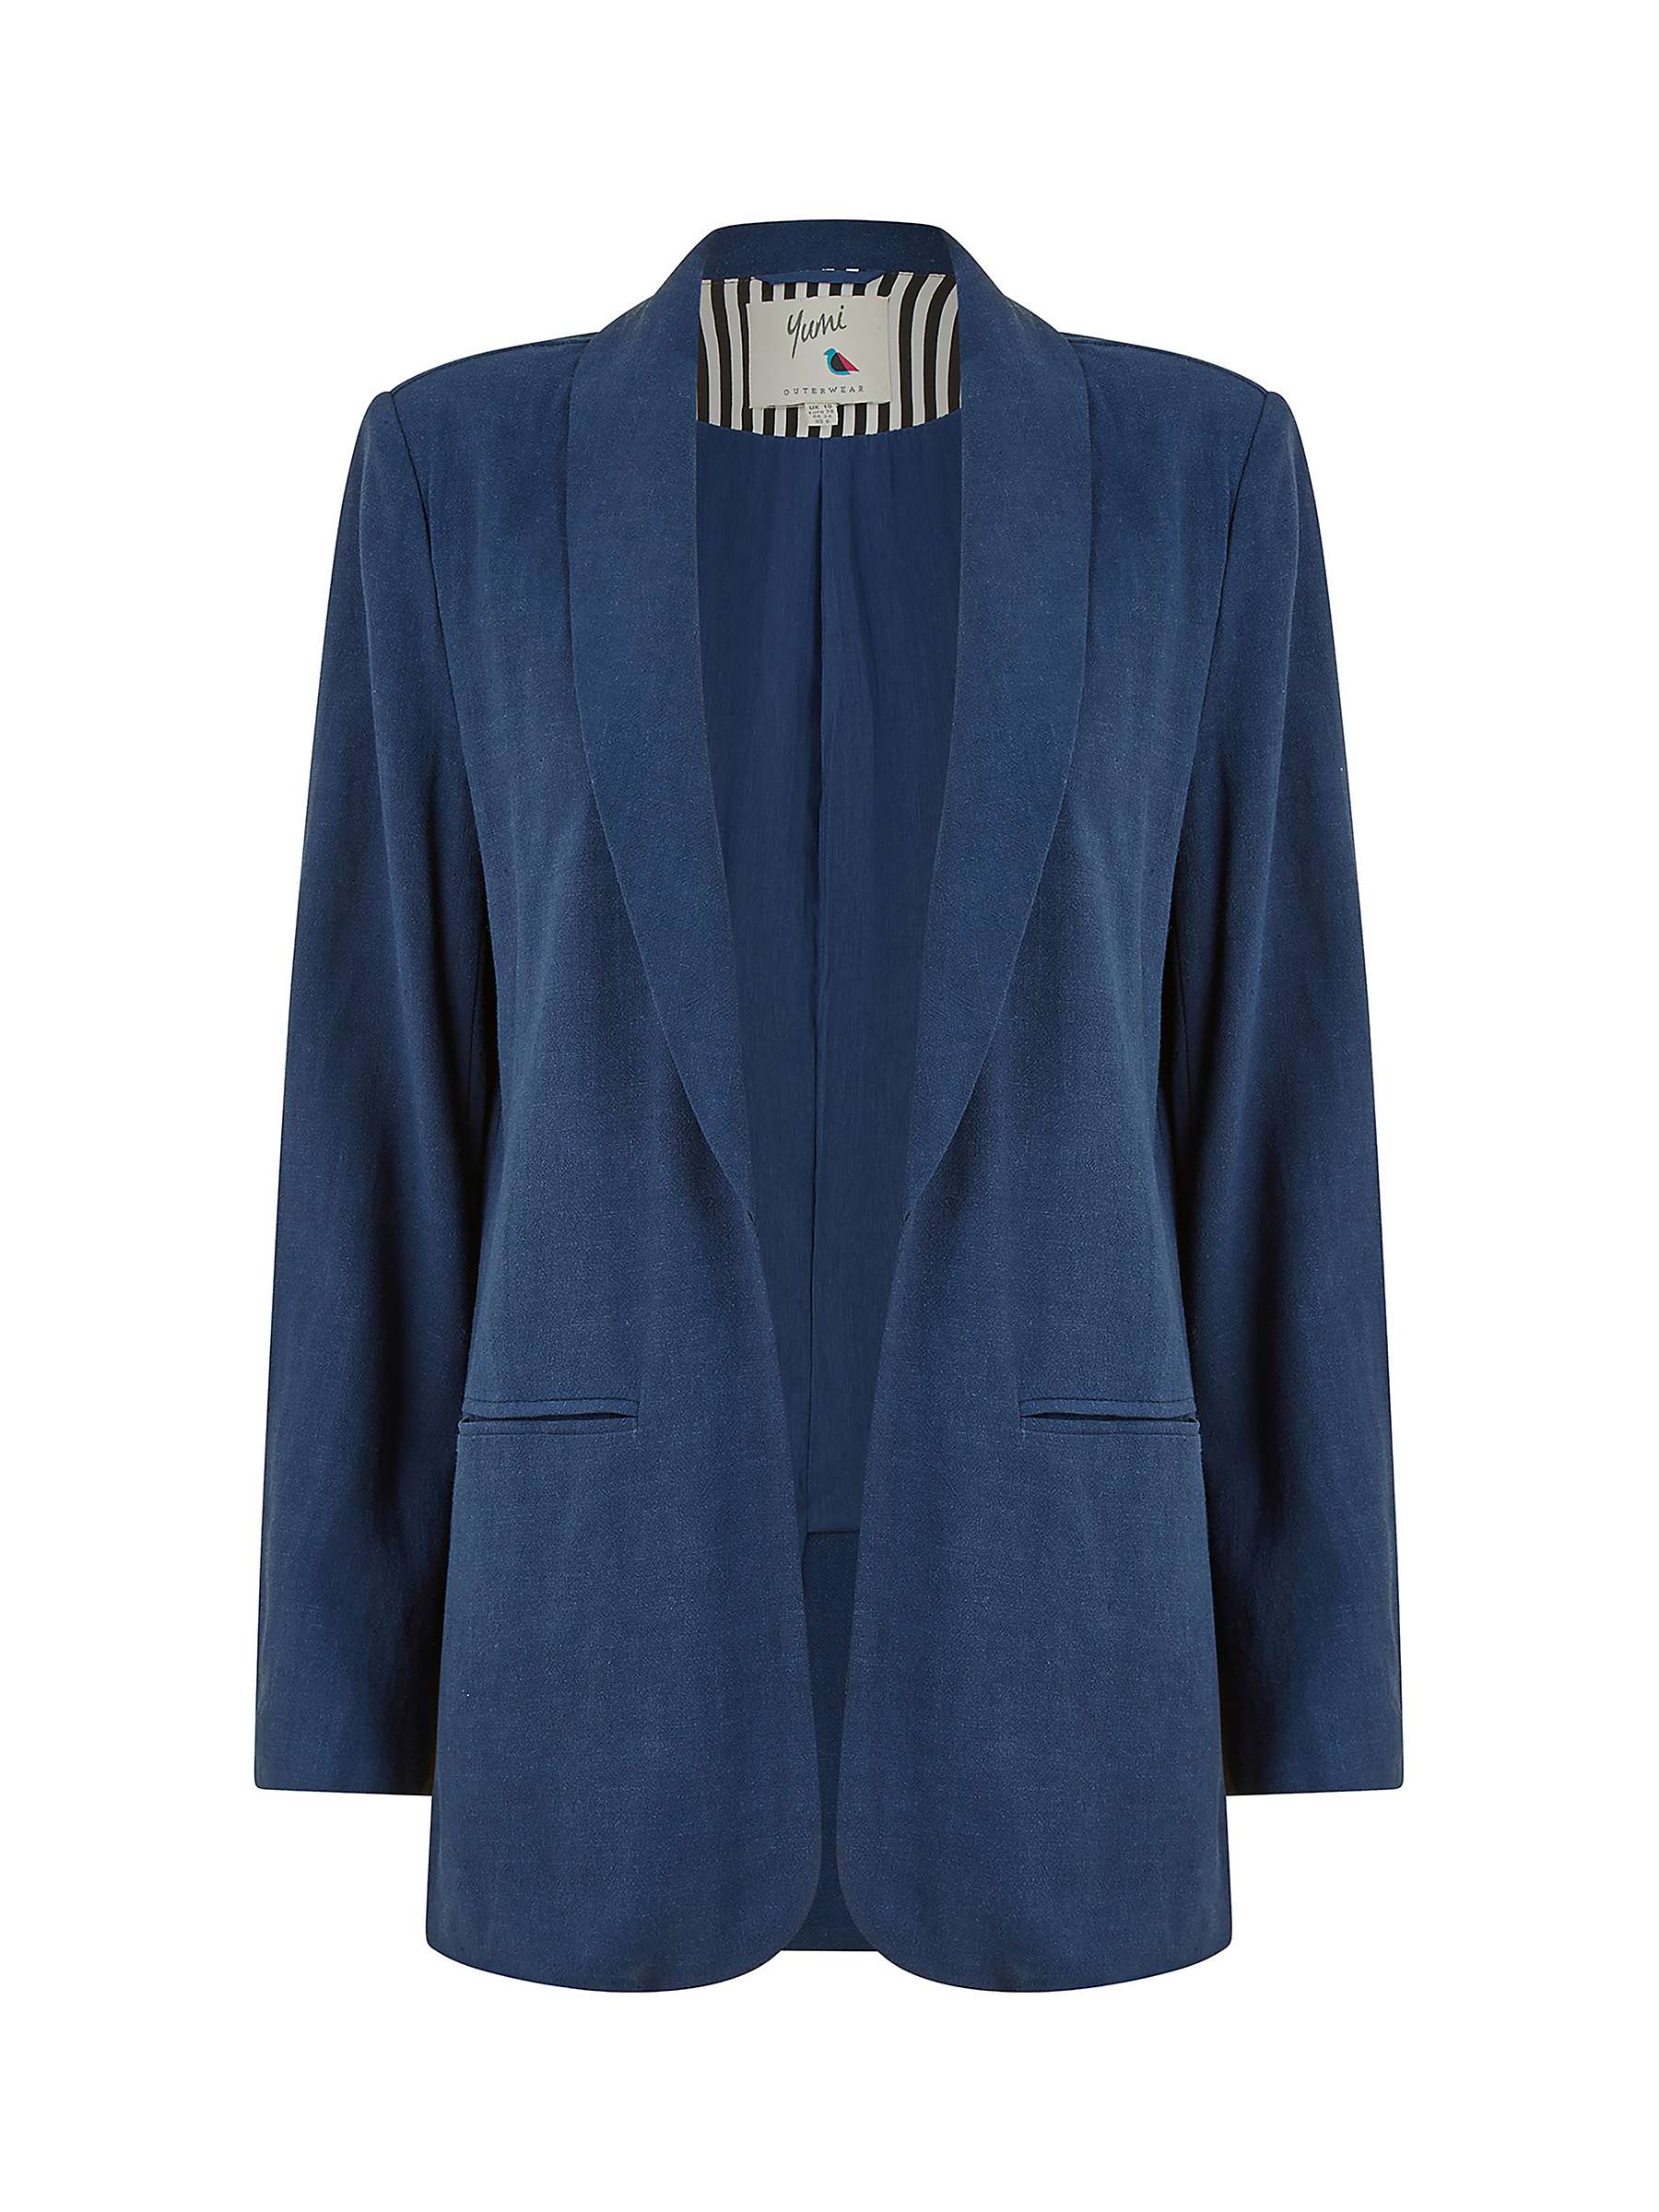 Buy Yumi Lightweight Relaxed Fit Blazer, Navy Online at johnlewis.com